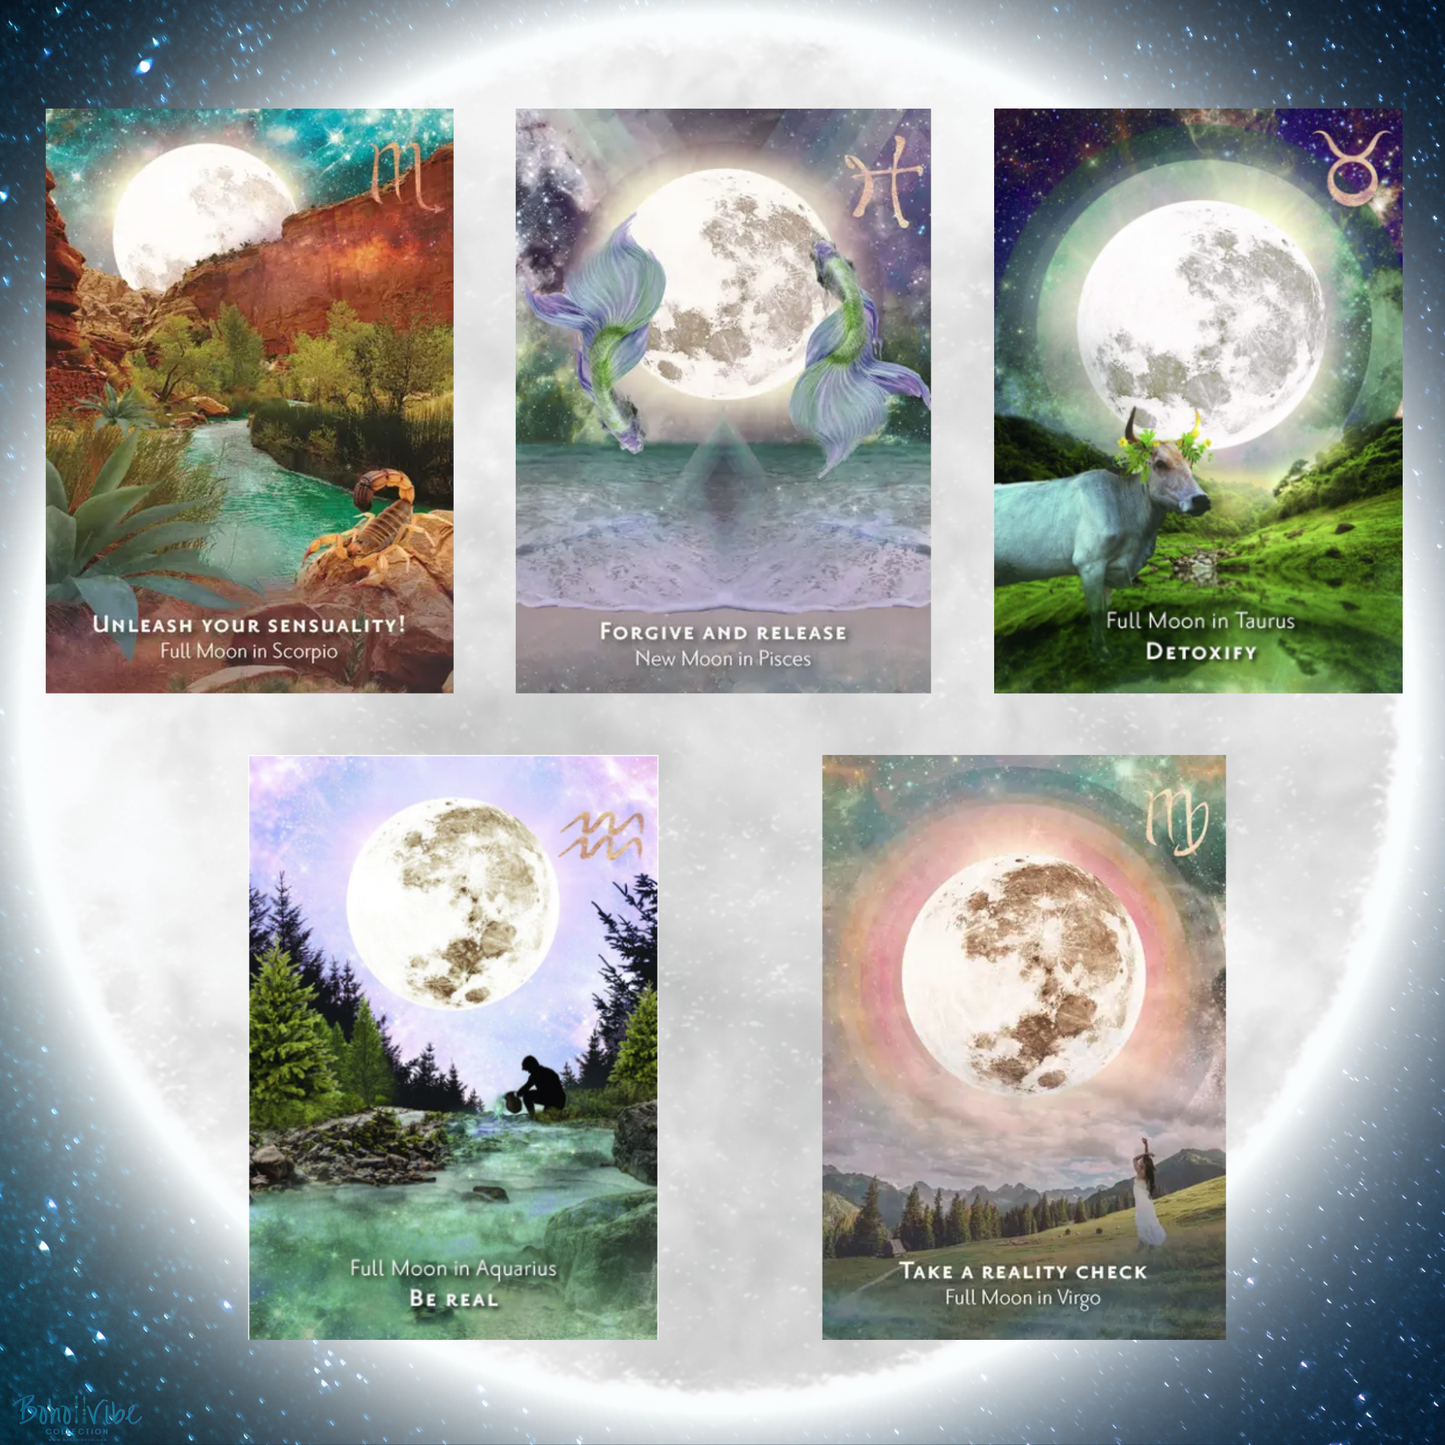 Boho ↡↟ Vibe Collection ↠ Moonology Manifestation Oracle Card Deck and Guidebook 